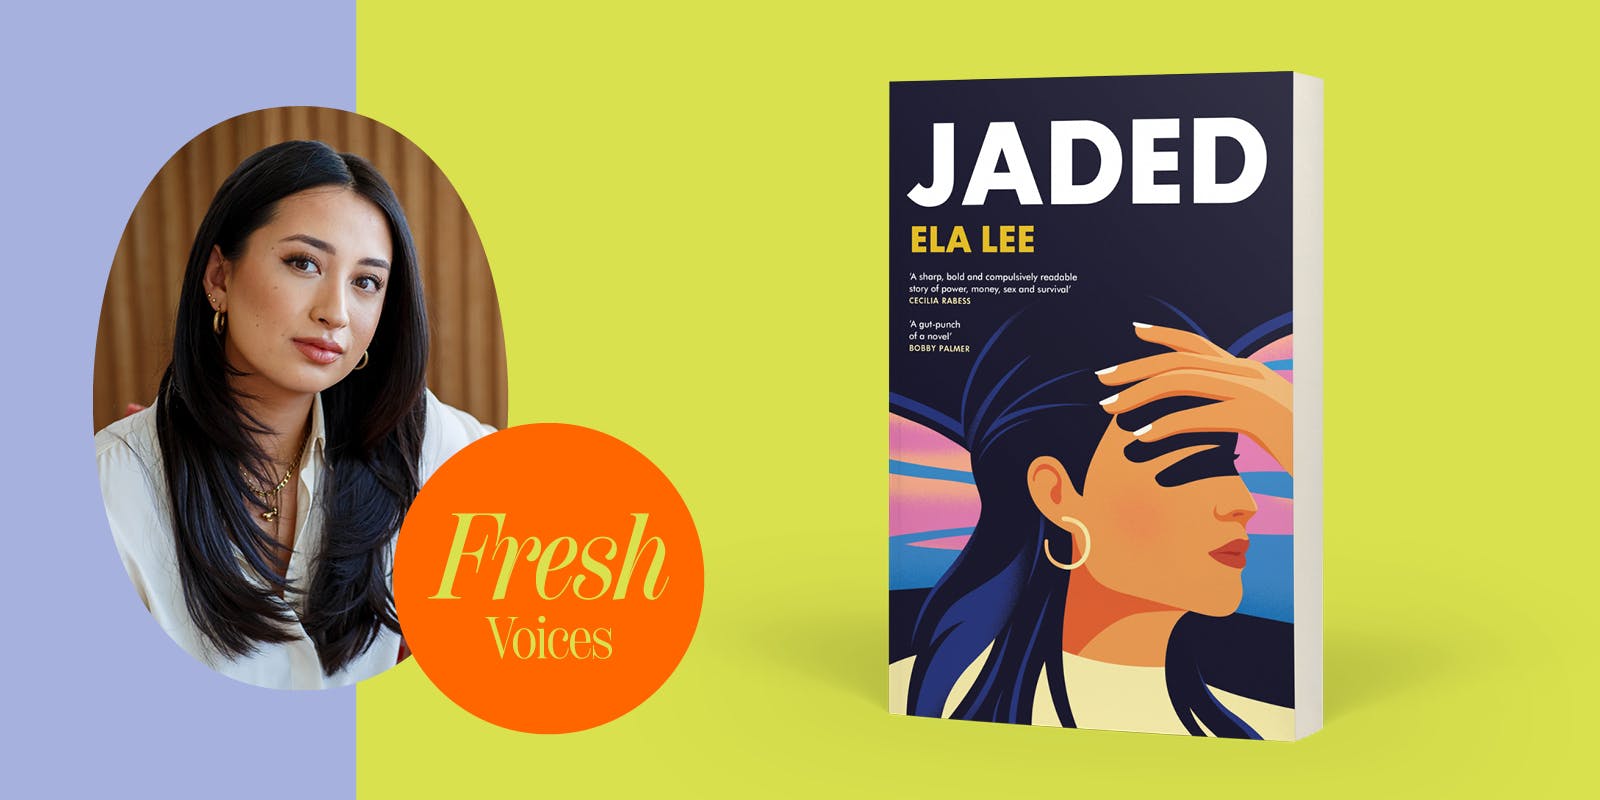 An interview with Ela Lee about her debut novel, Jaded